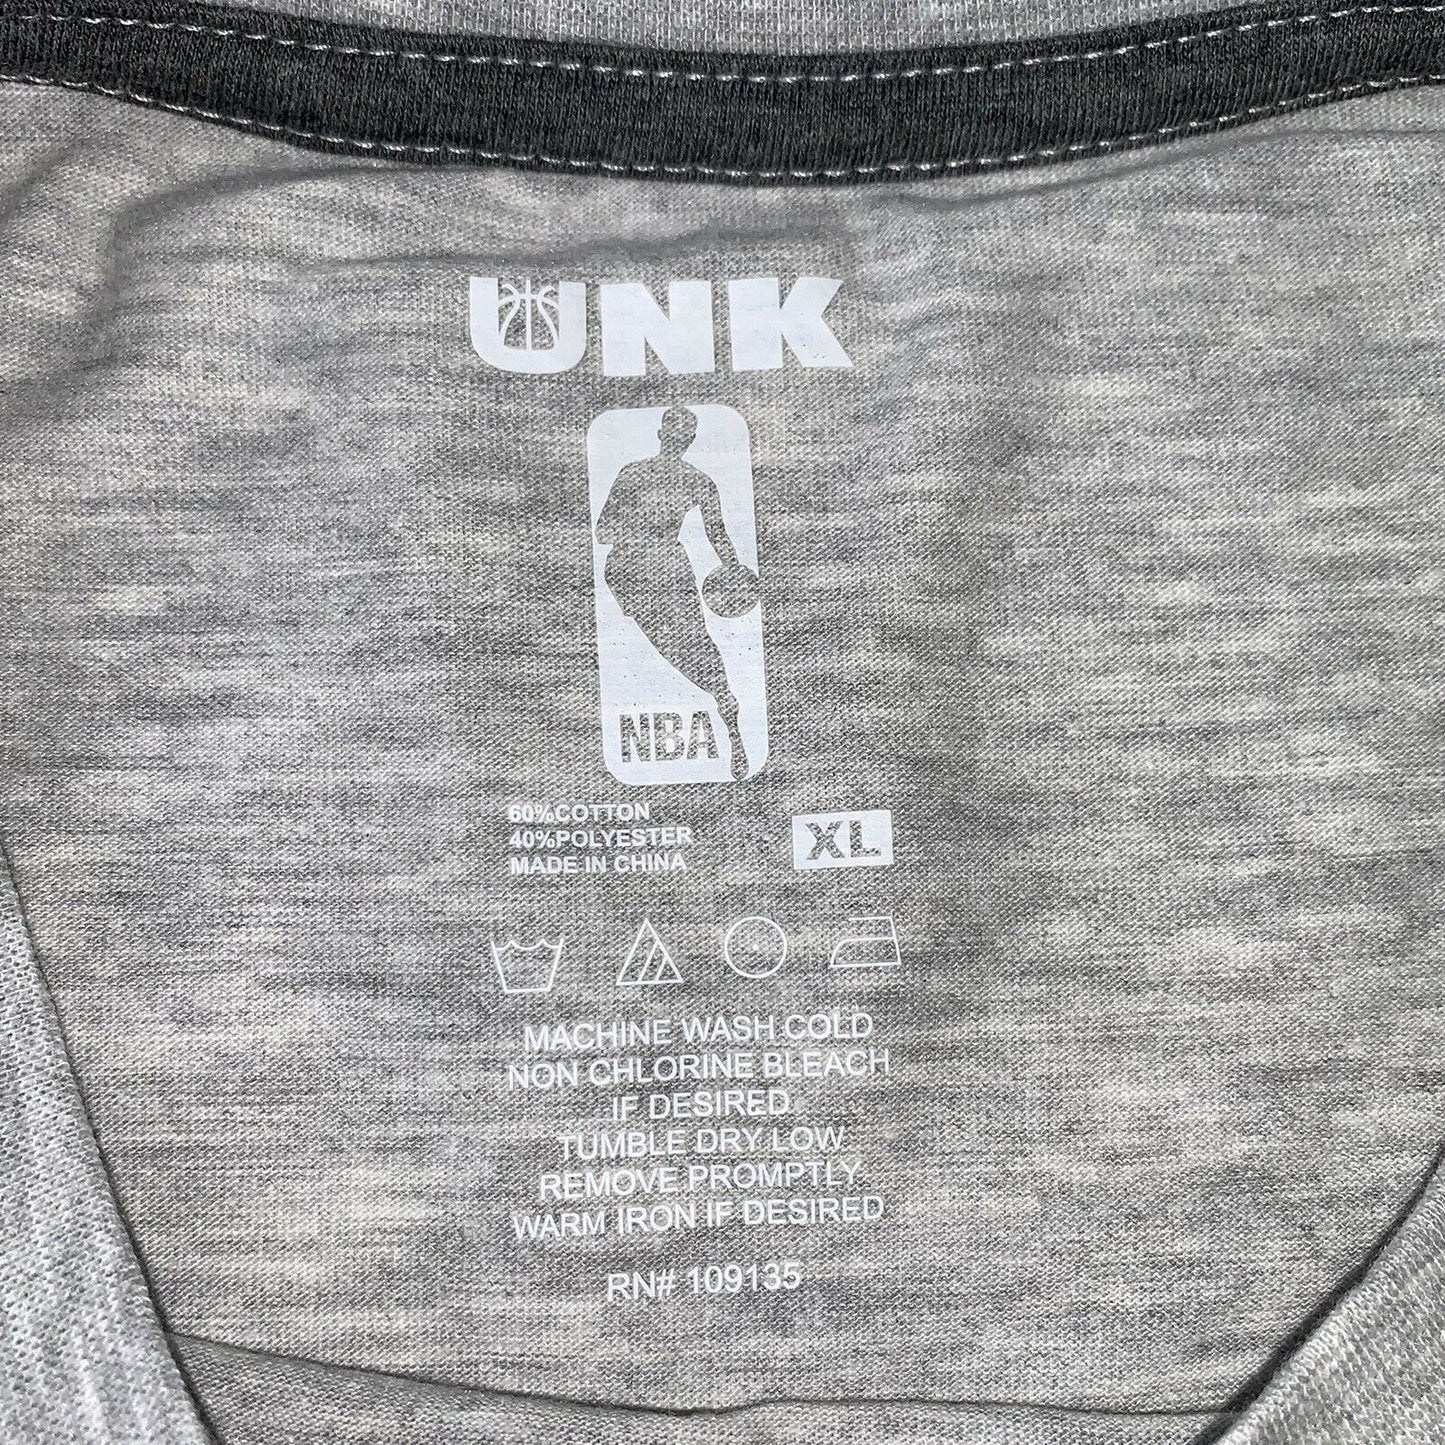 UNK NBA Supreme Long Sleeve Pullover Tee shirt Size XL. - Fannetti Boutique